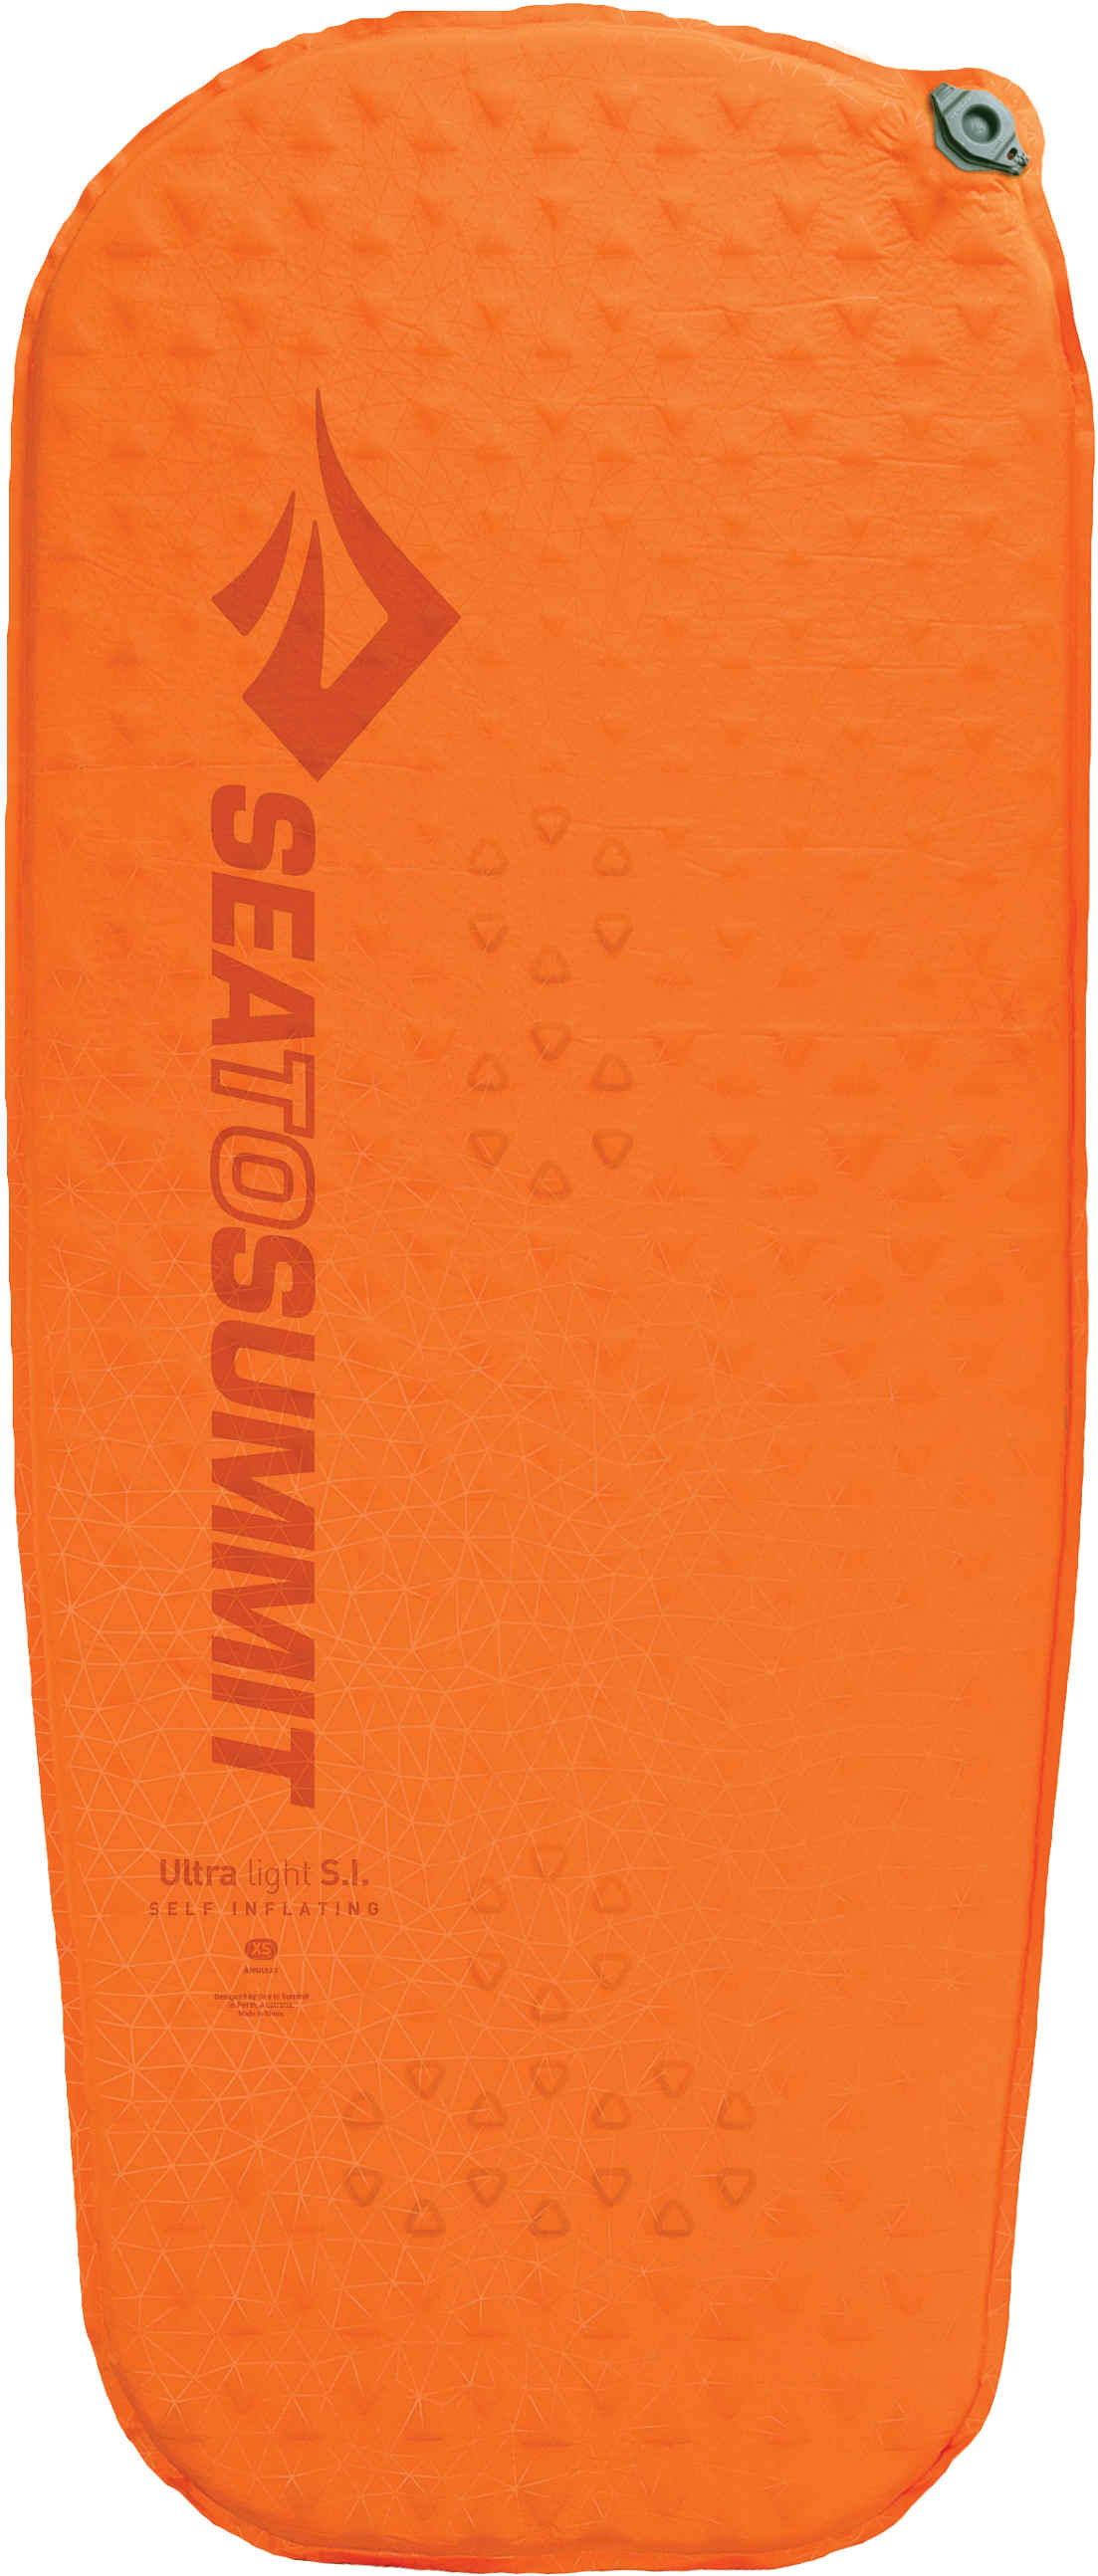 Sea to Summit Ultralight SI Mat & Free 2 Day Shipping CampSaver